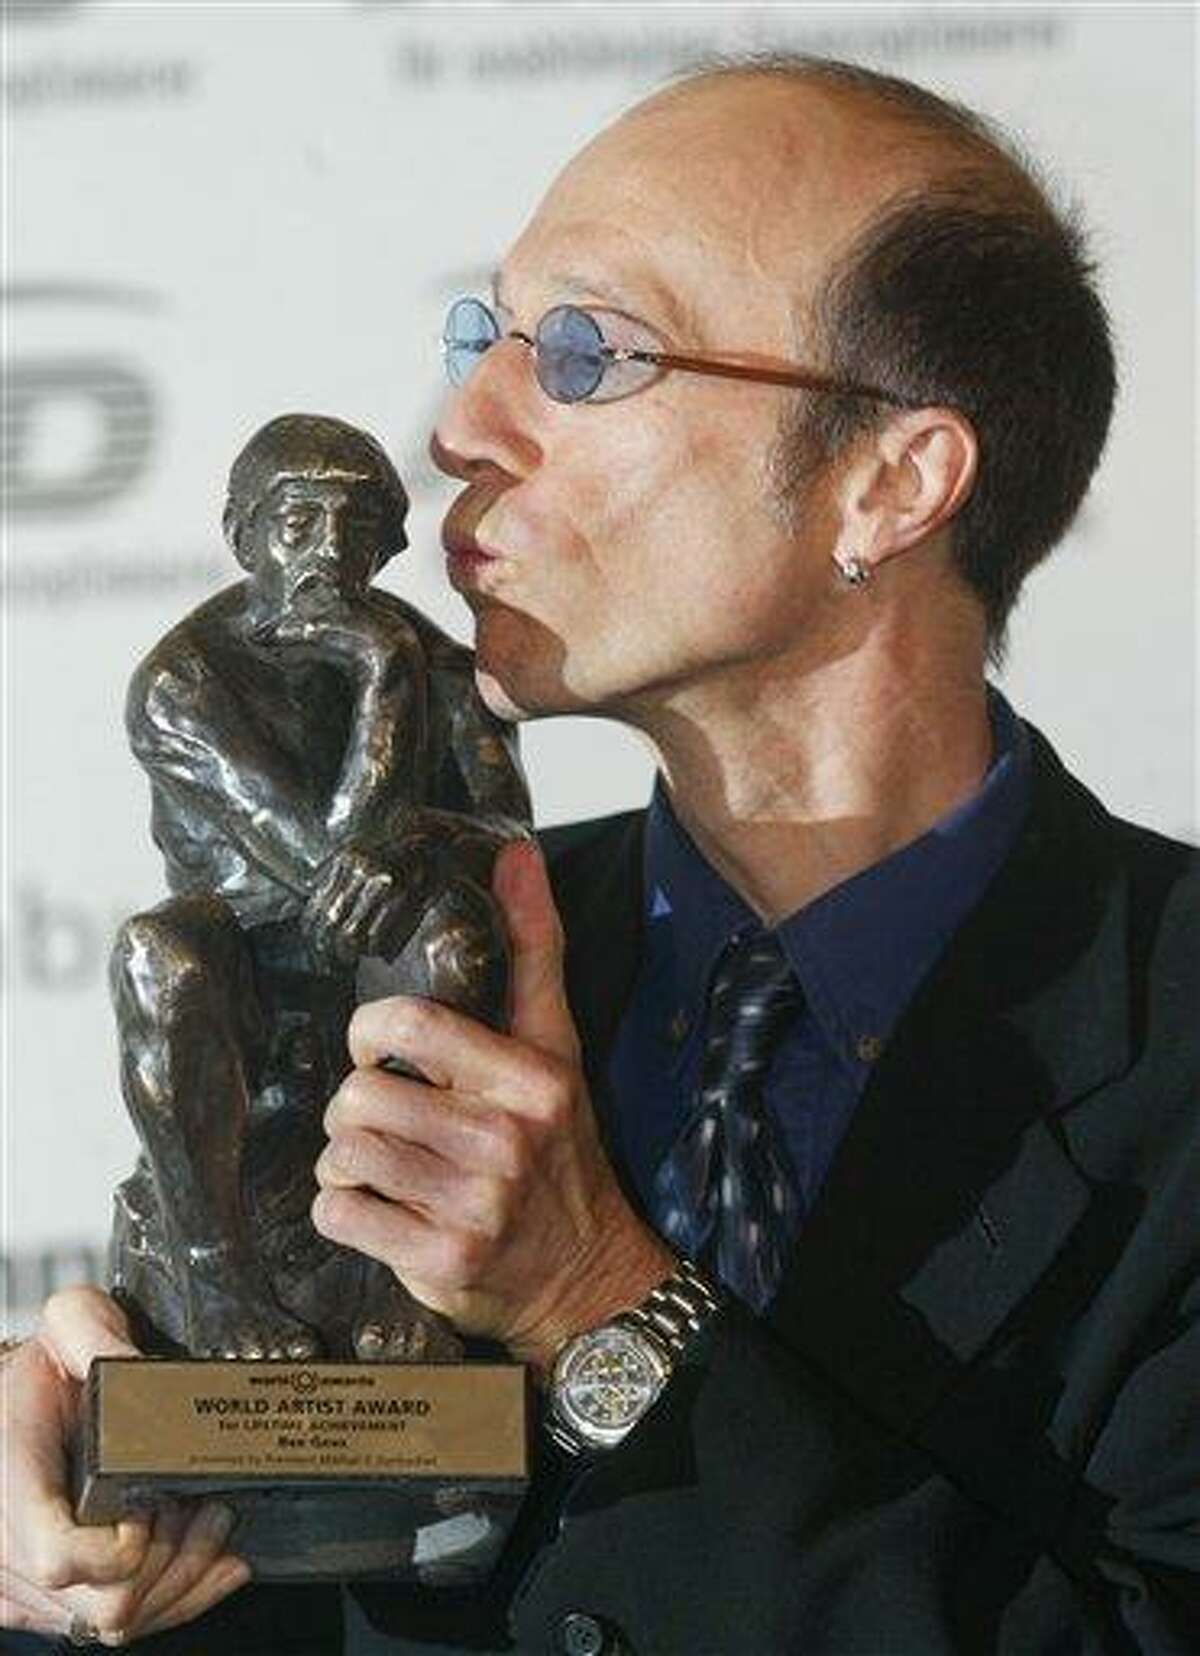 FILE - In this Oct. 22, 2003, file photo, musician Robin Gibb of The Bee Gees kisses his prize after he received it at the World Award ceremony in Hamburg, Germany. A representative said on Sunday, May 20, 2012, that Gibb has died at the age of 62. (AP Photo/Joerg Sarbach, File)